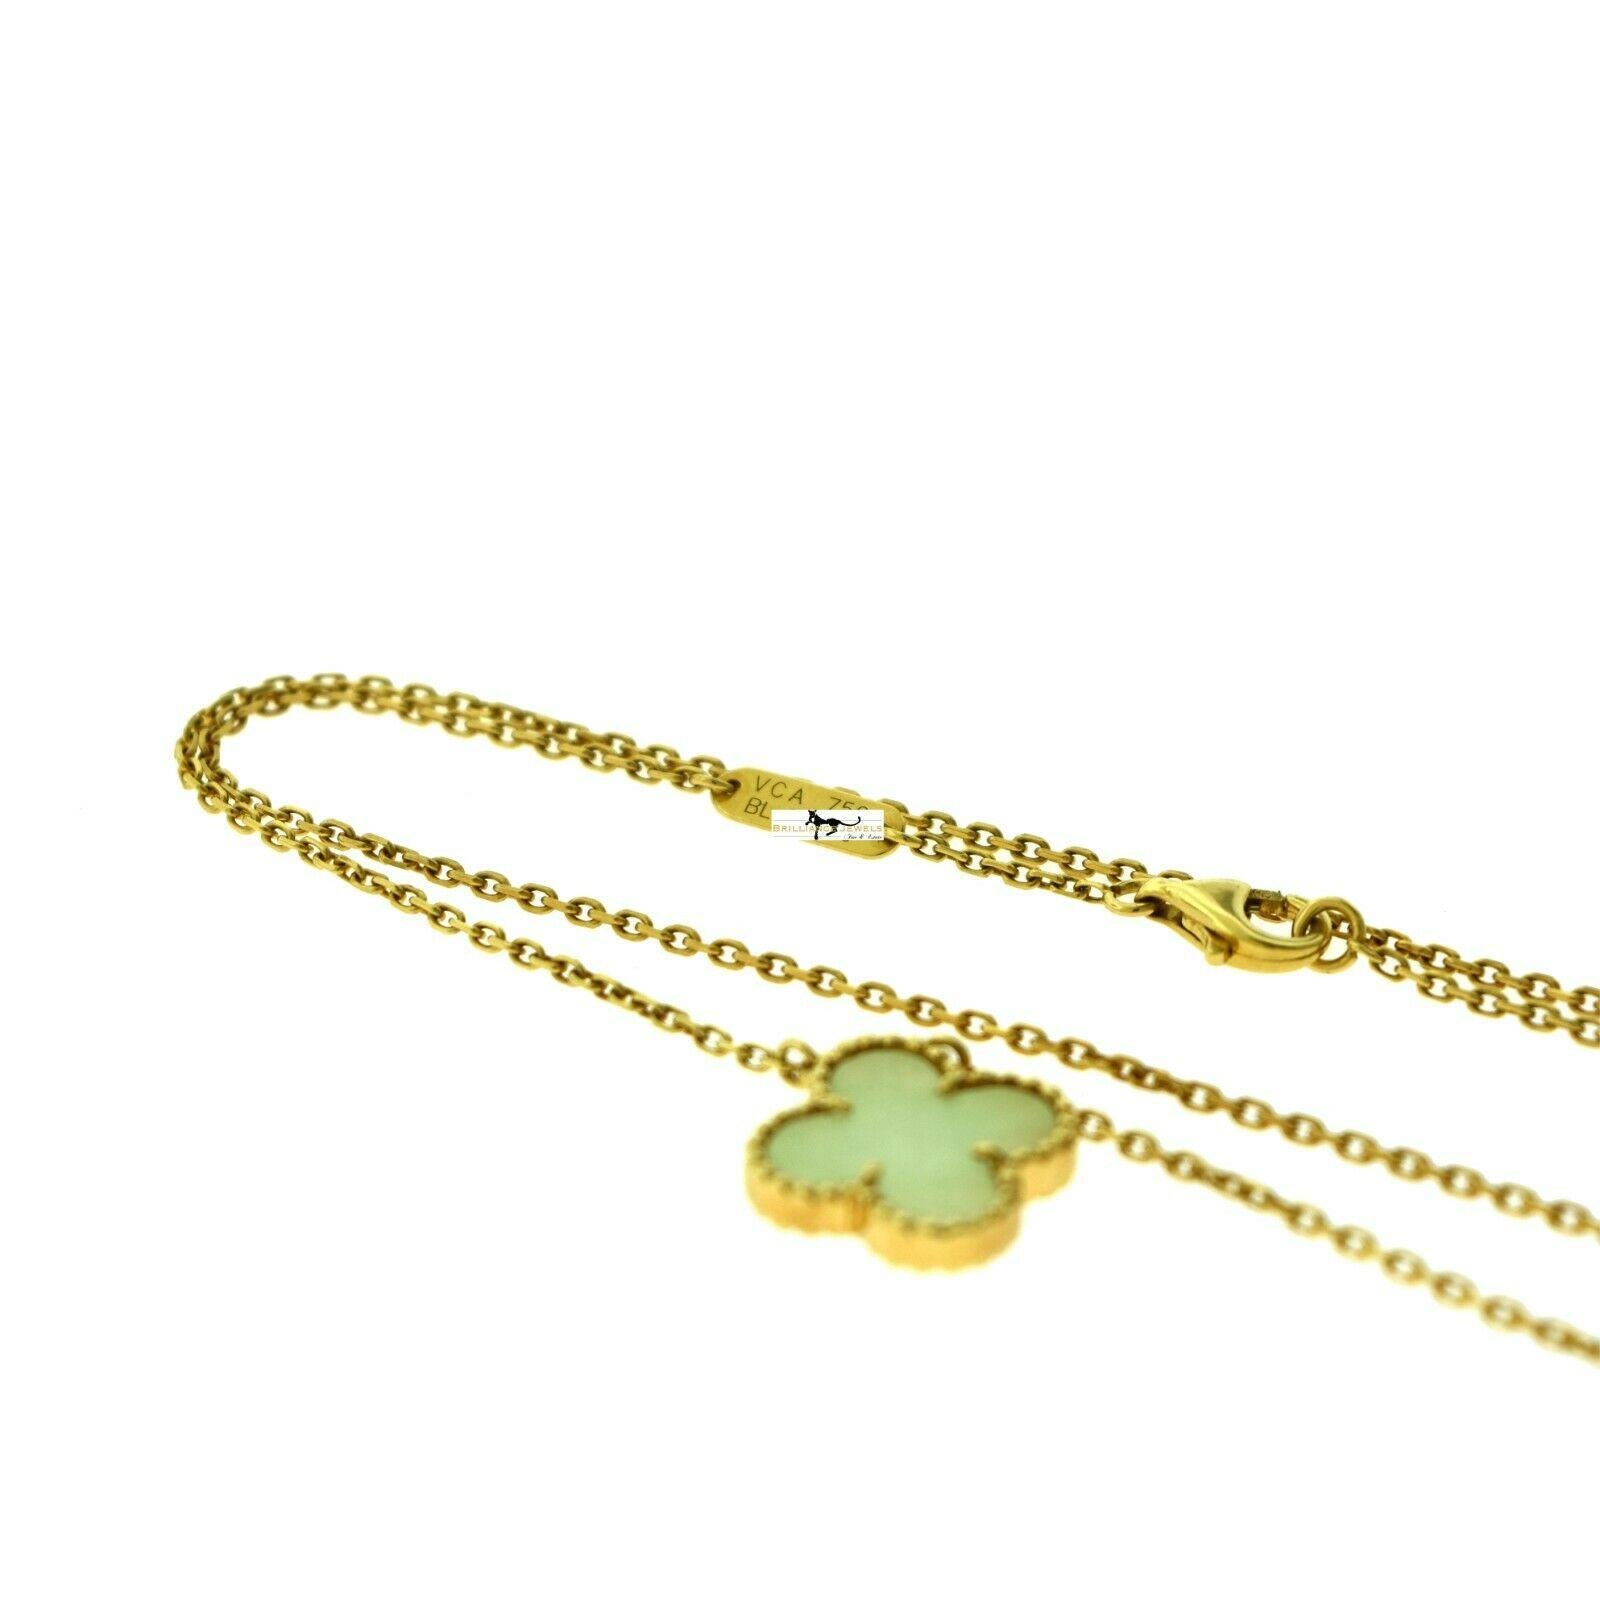 Designer: Van Cleef & Arpels

Collection: Vintage Alhambra

Style: 1 Motif Single Pendant Necklace

Metal Type: Yellow Gold

Metal Purity: 18k

Stones: Jade

Necklace Length: 16.8 inches

Total Item Weight (grams): 

Motif Dimensions: approx. 0.75